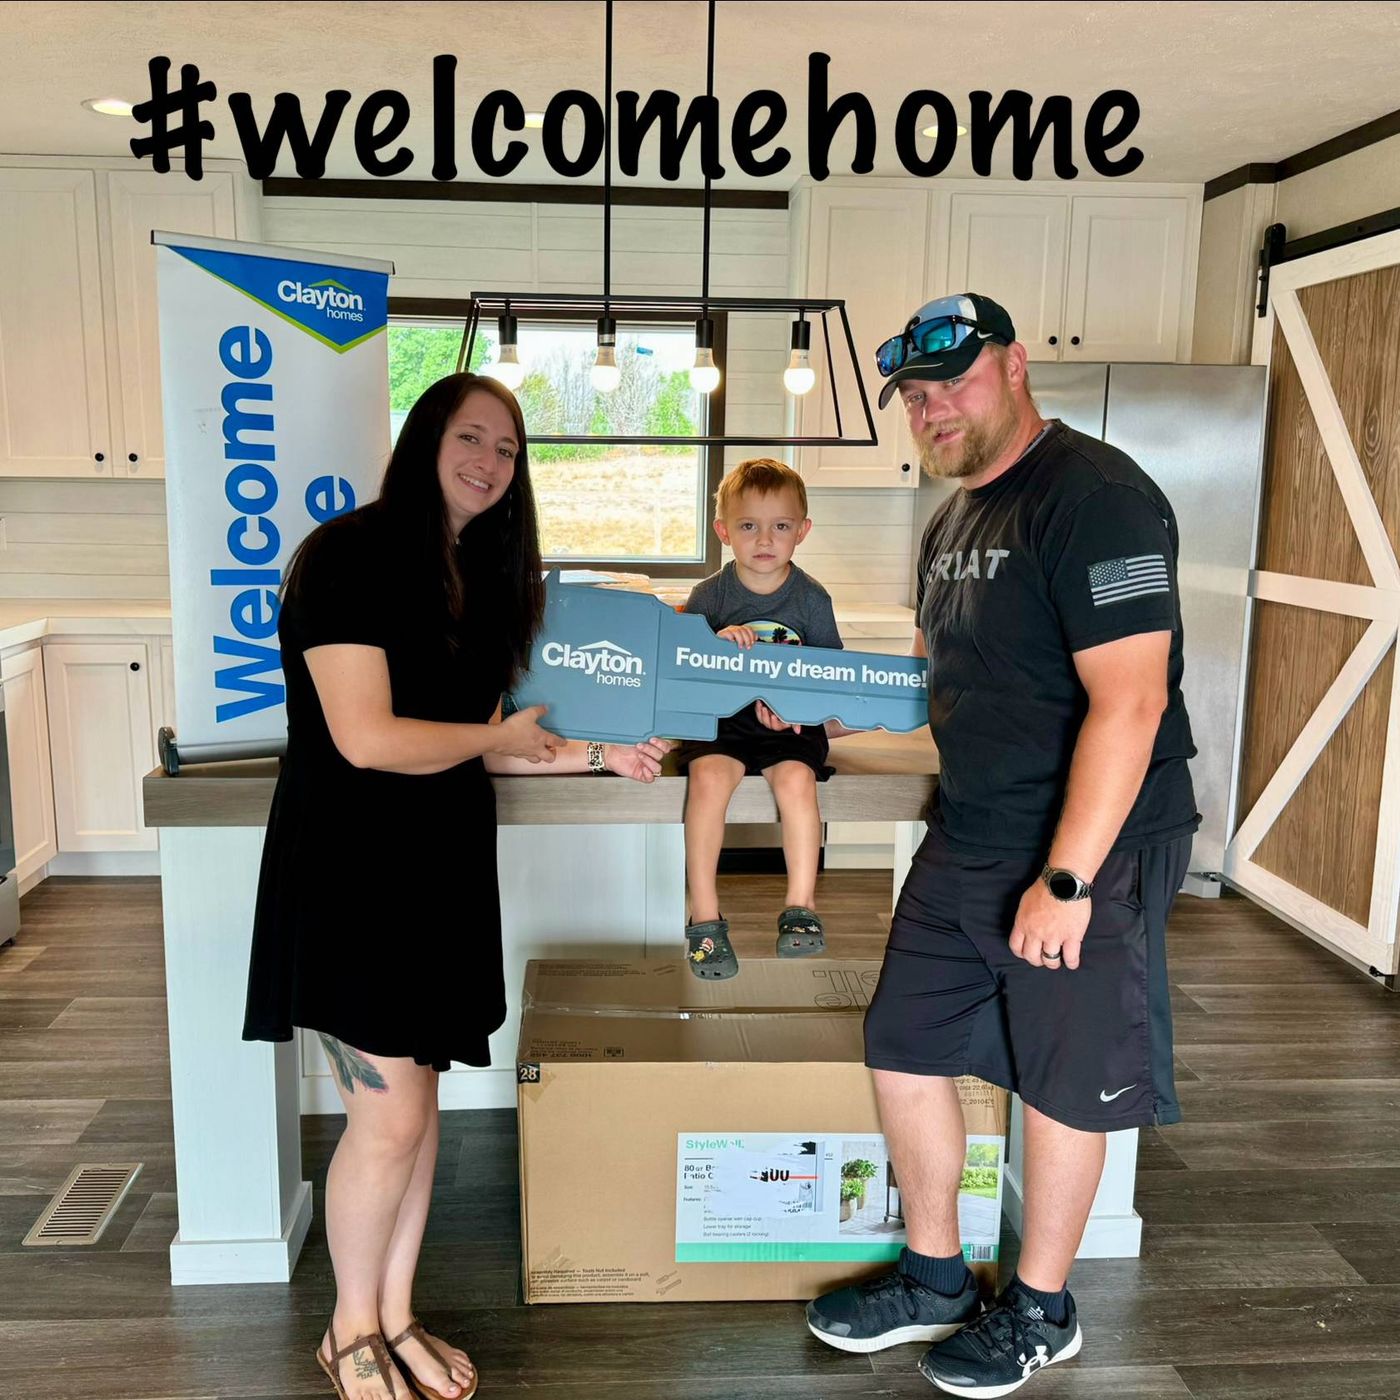 Tyler W. welcome home image